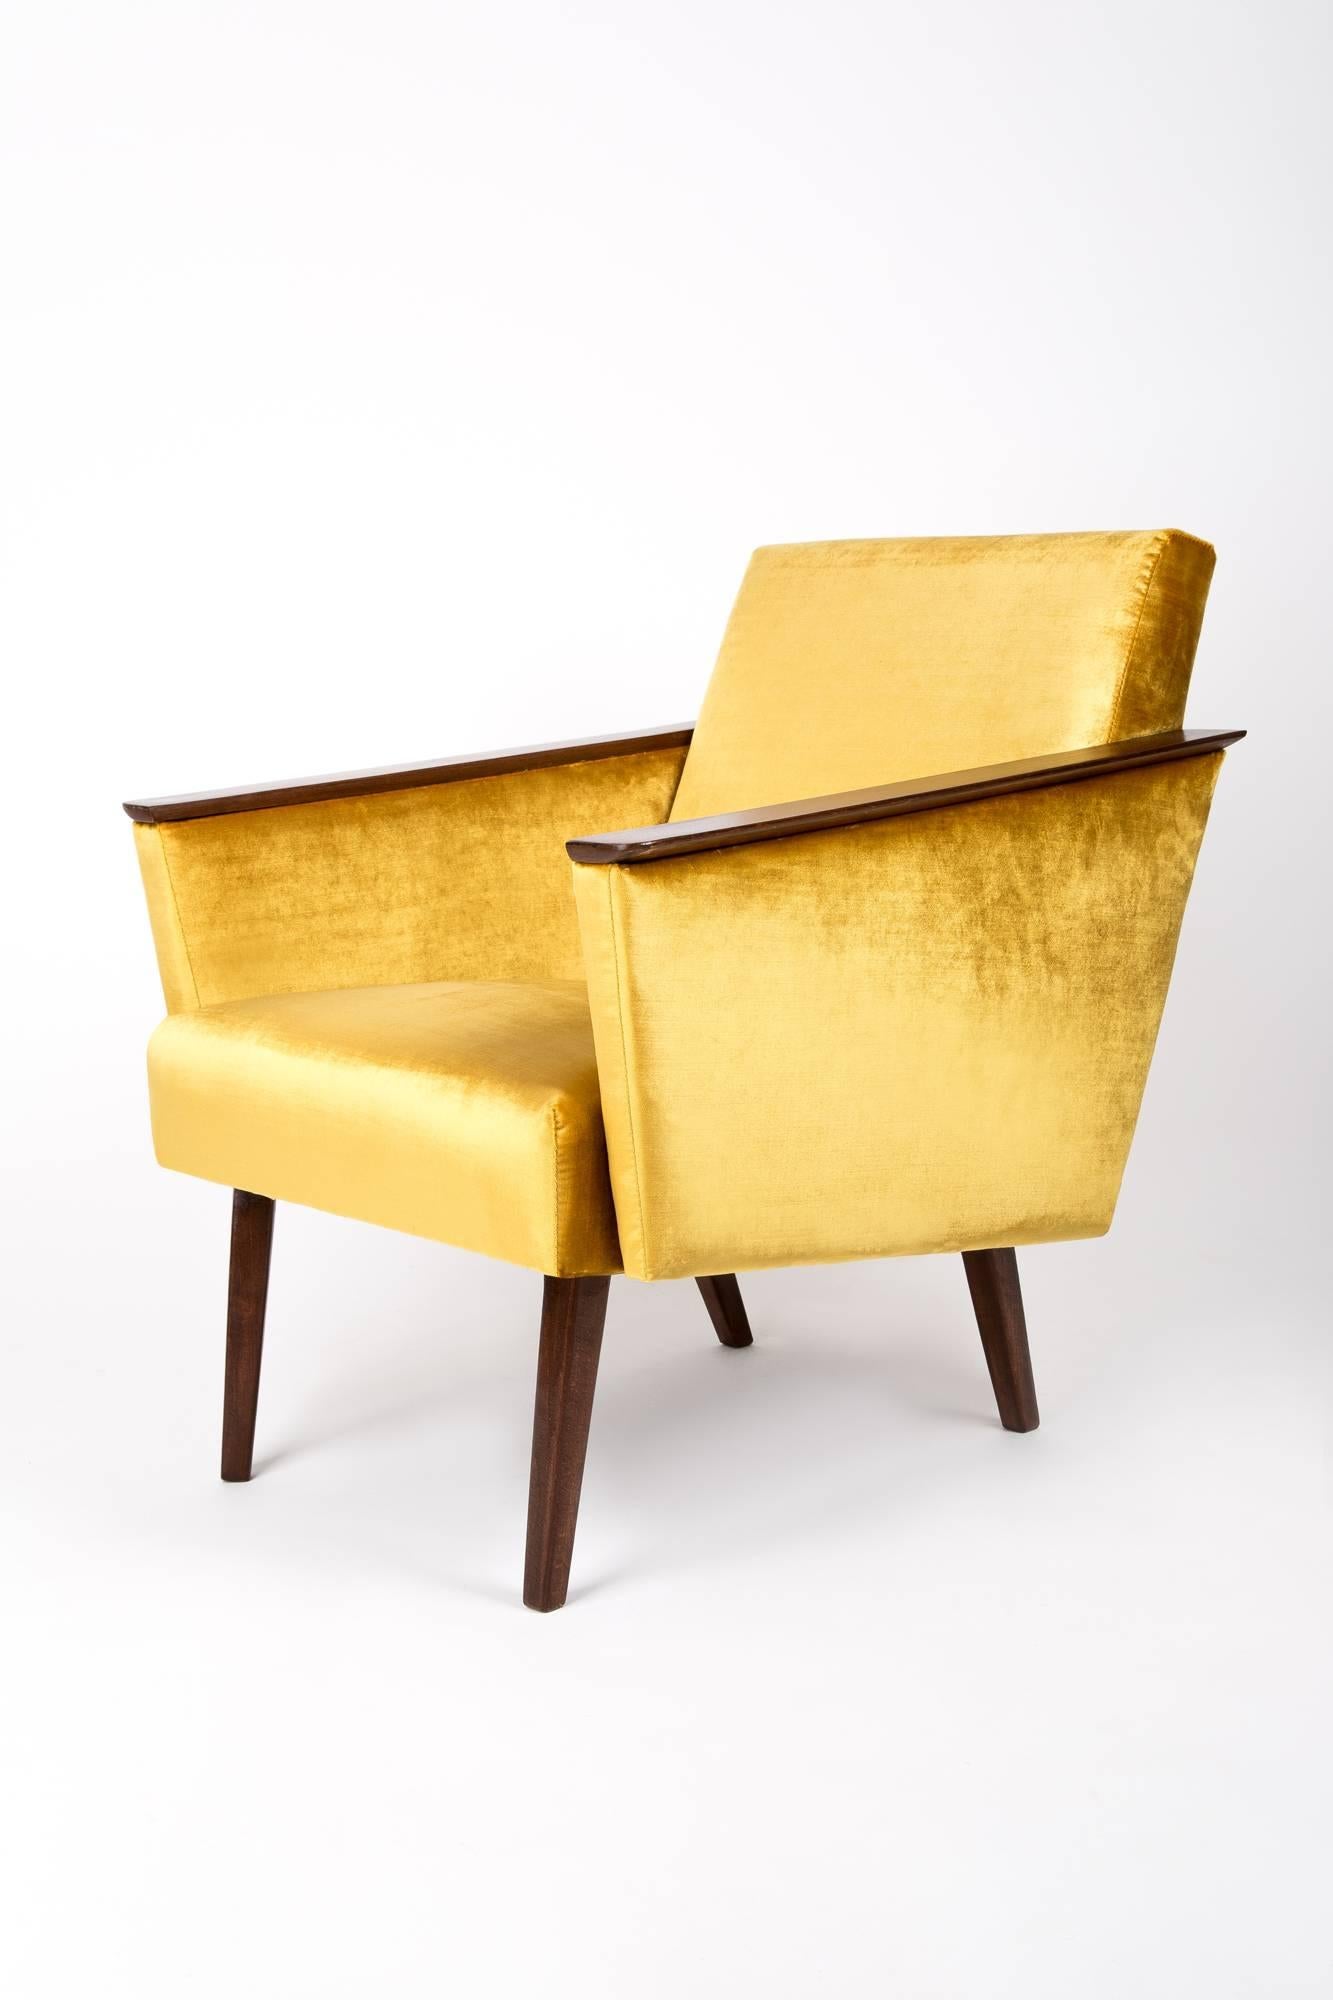 Hand-Crafted Mid Century Yellow Mustard Armchair, 1960s, DDR, Germany. For Sale